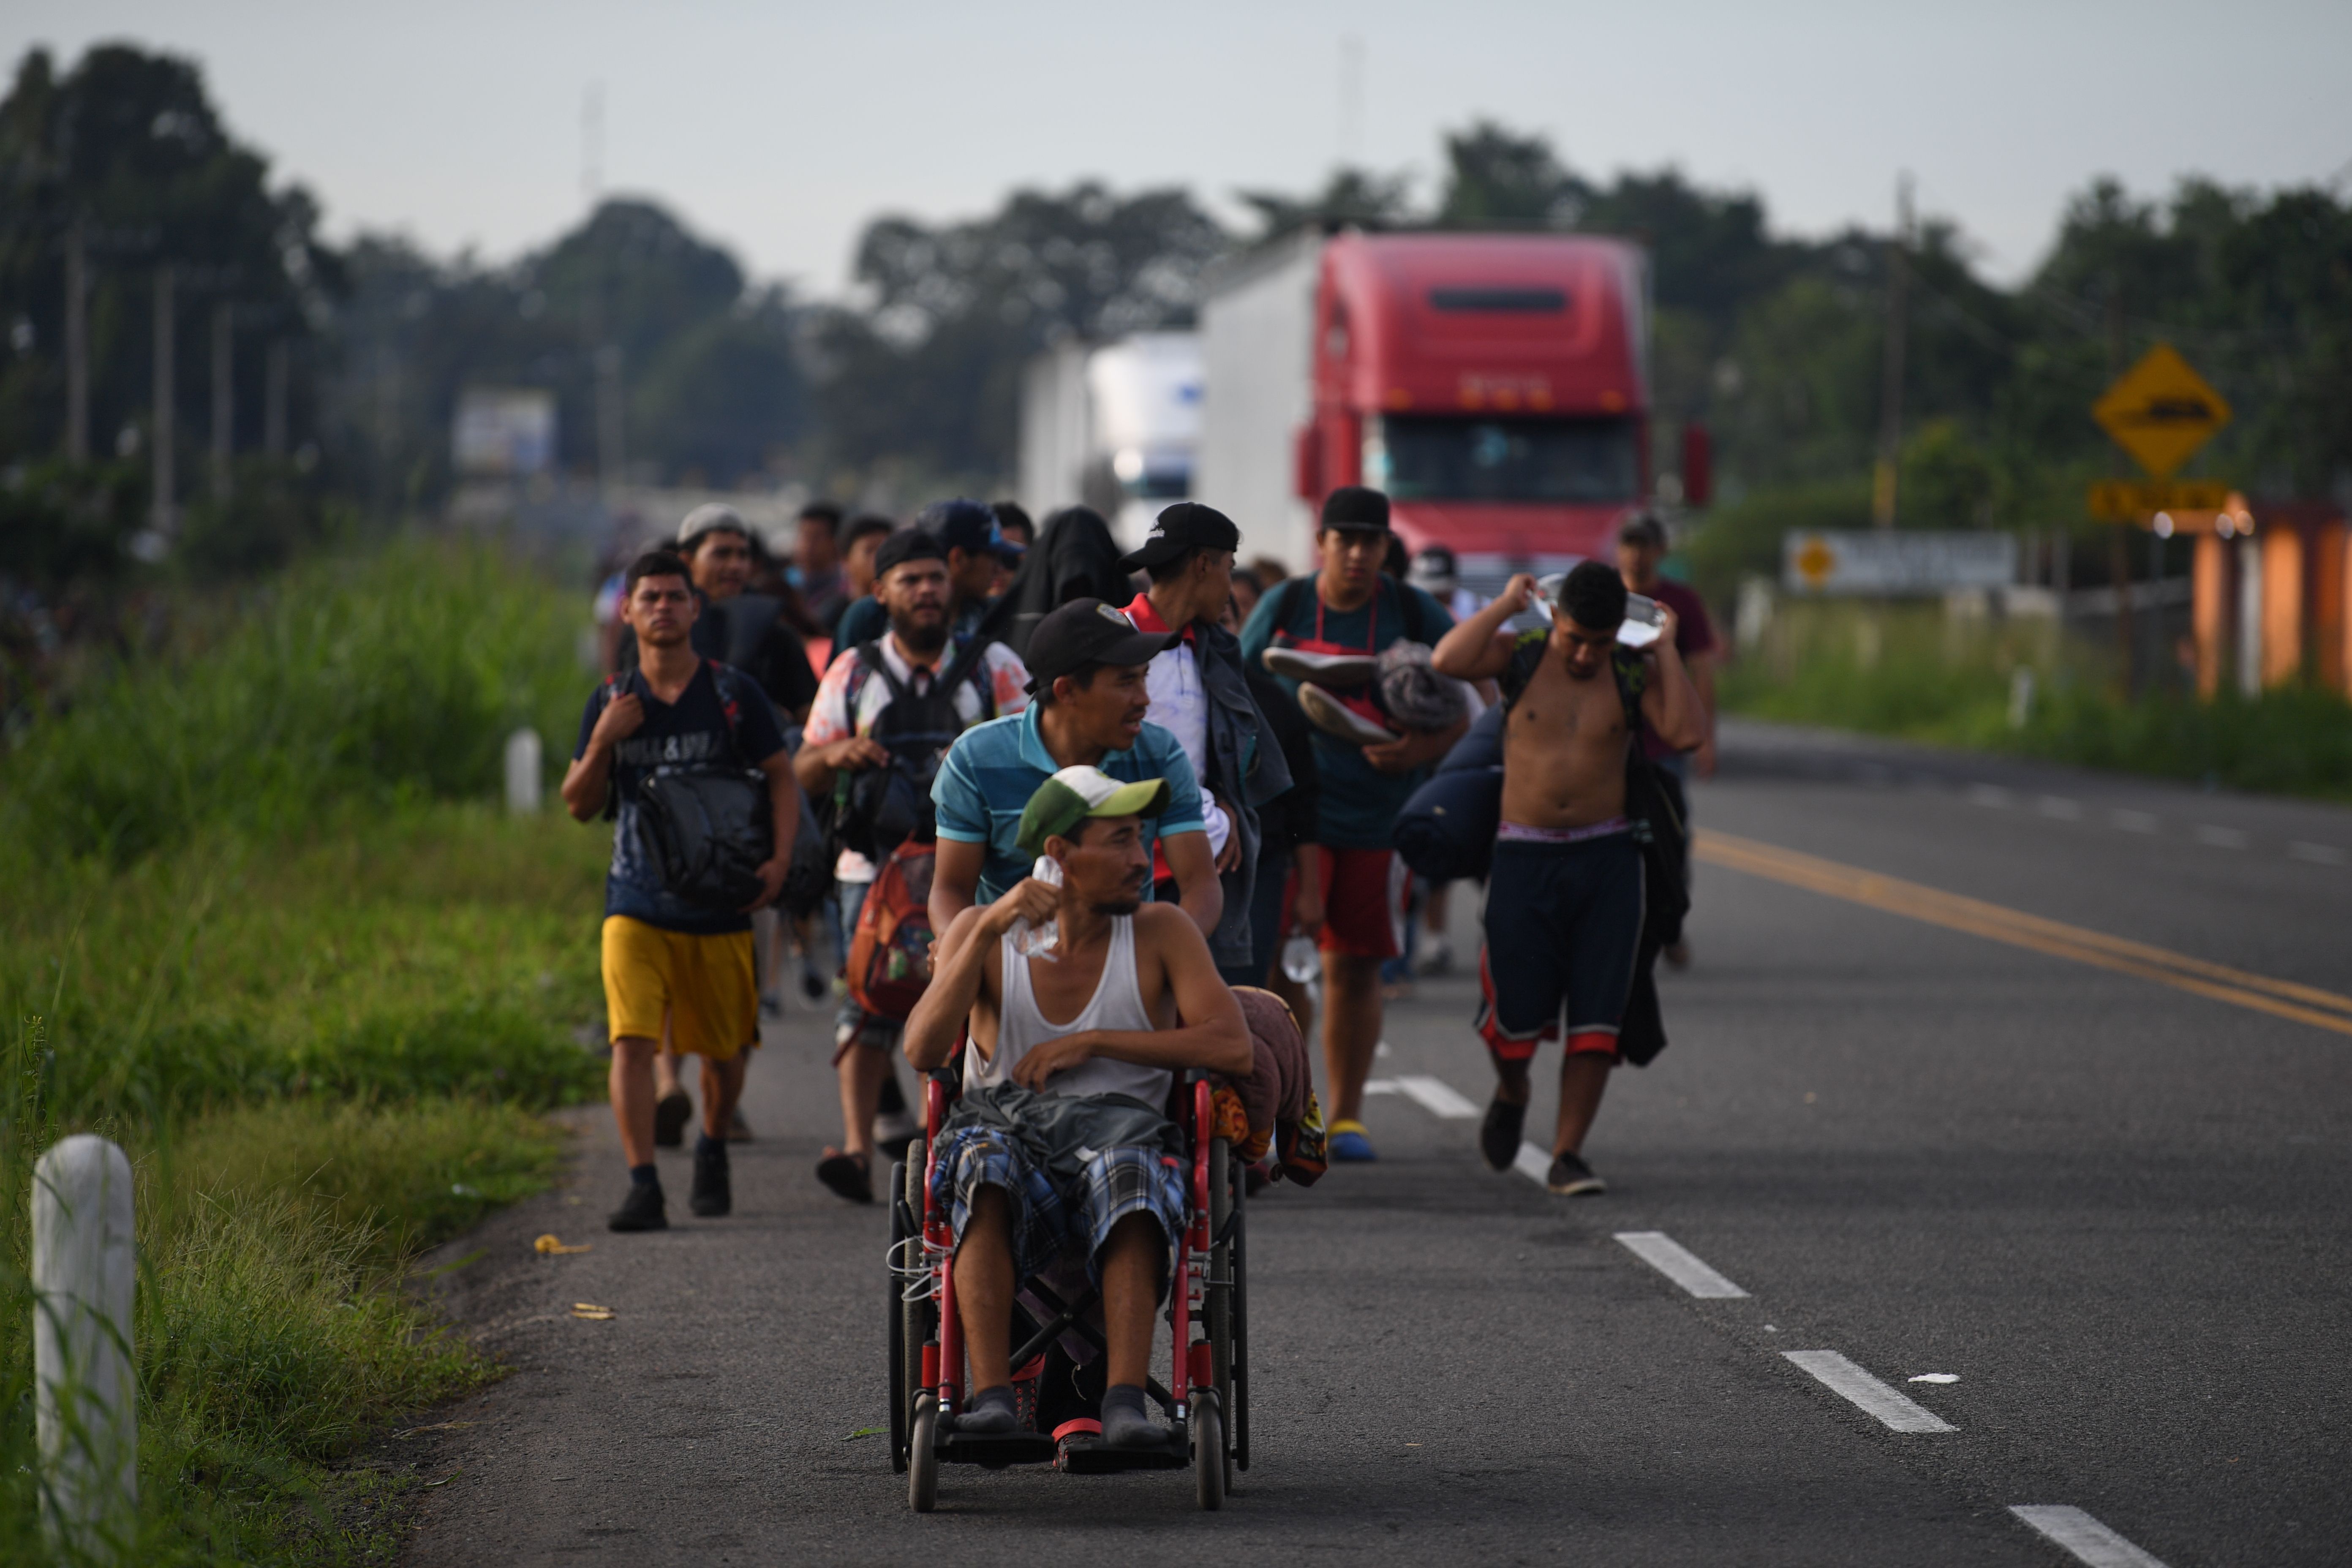 New Images Show Exactly How Massive The Migrant Caravan Is Traveling to The USA ...